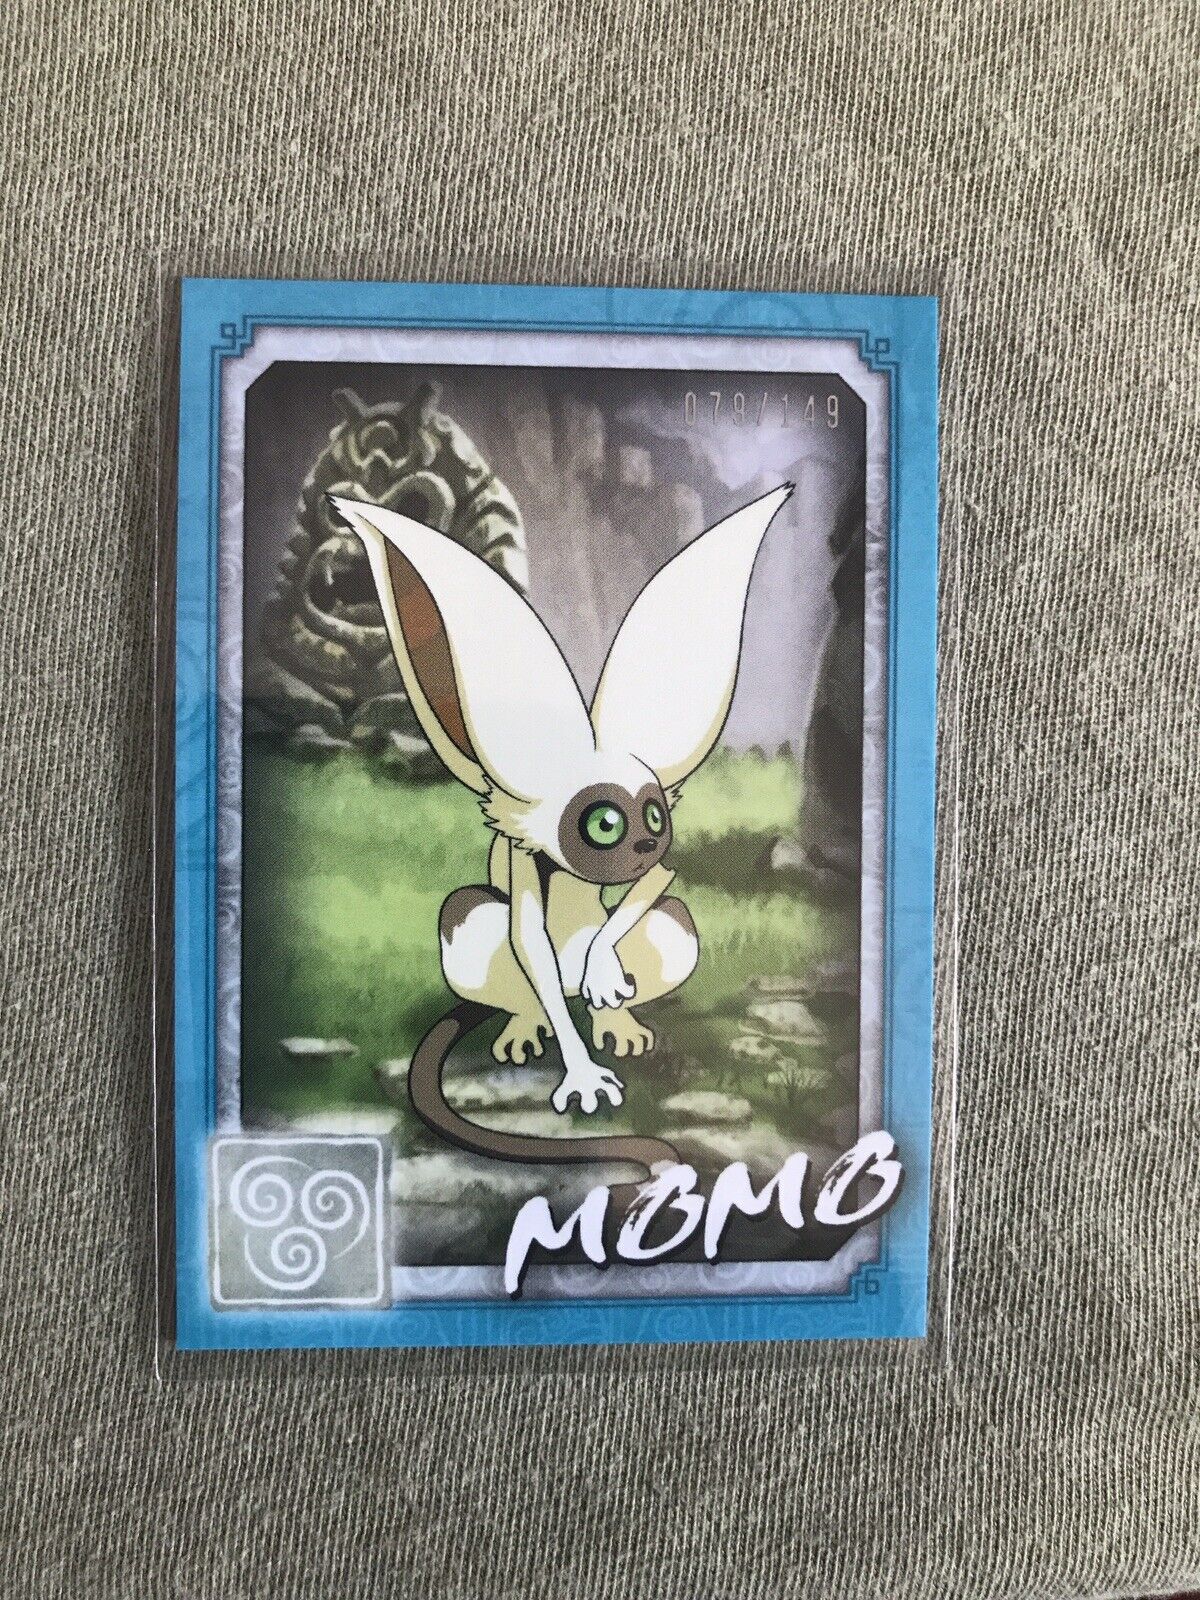 2021 Topps On Demand Avatar: The Last Airbender Blue Momo Parallel SP Card #/149